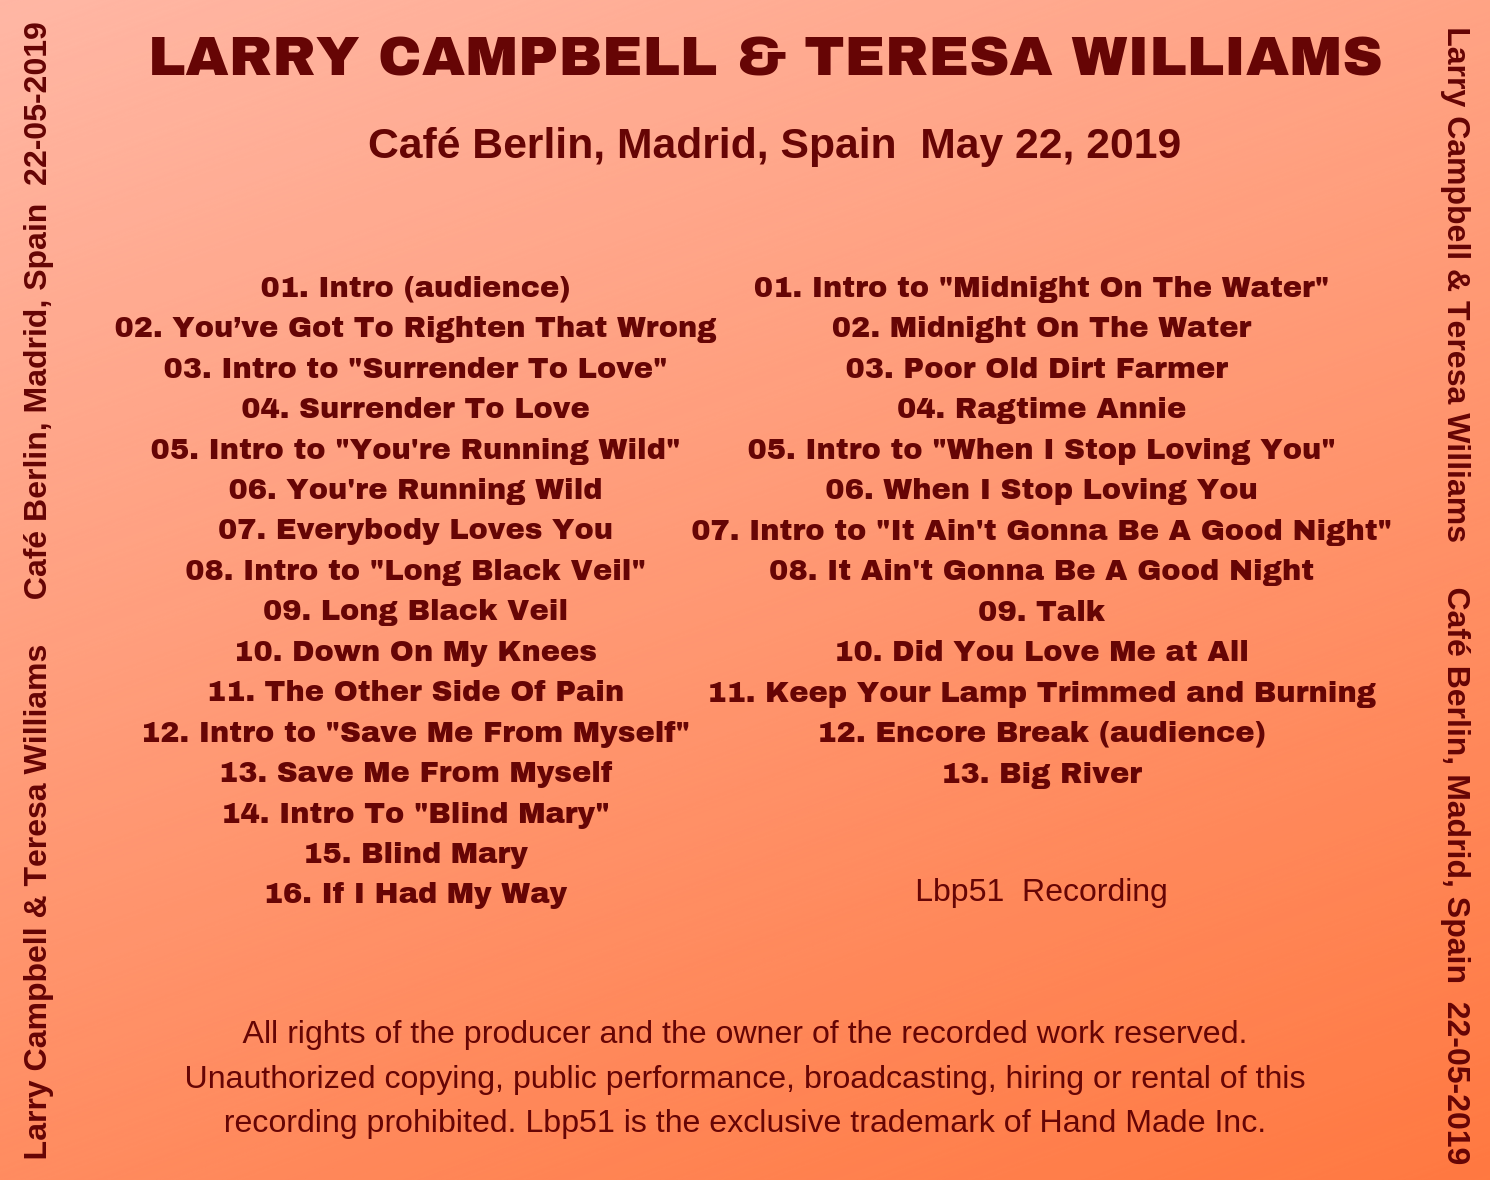 LarryCampbellTeresaWilliams2019-05-22CafeBerlinMadridSpain (2).png